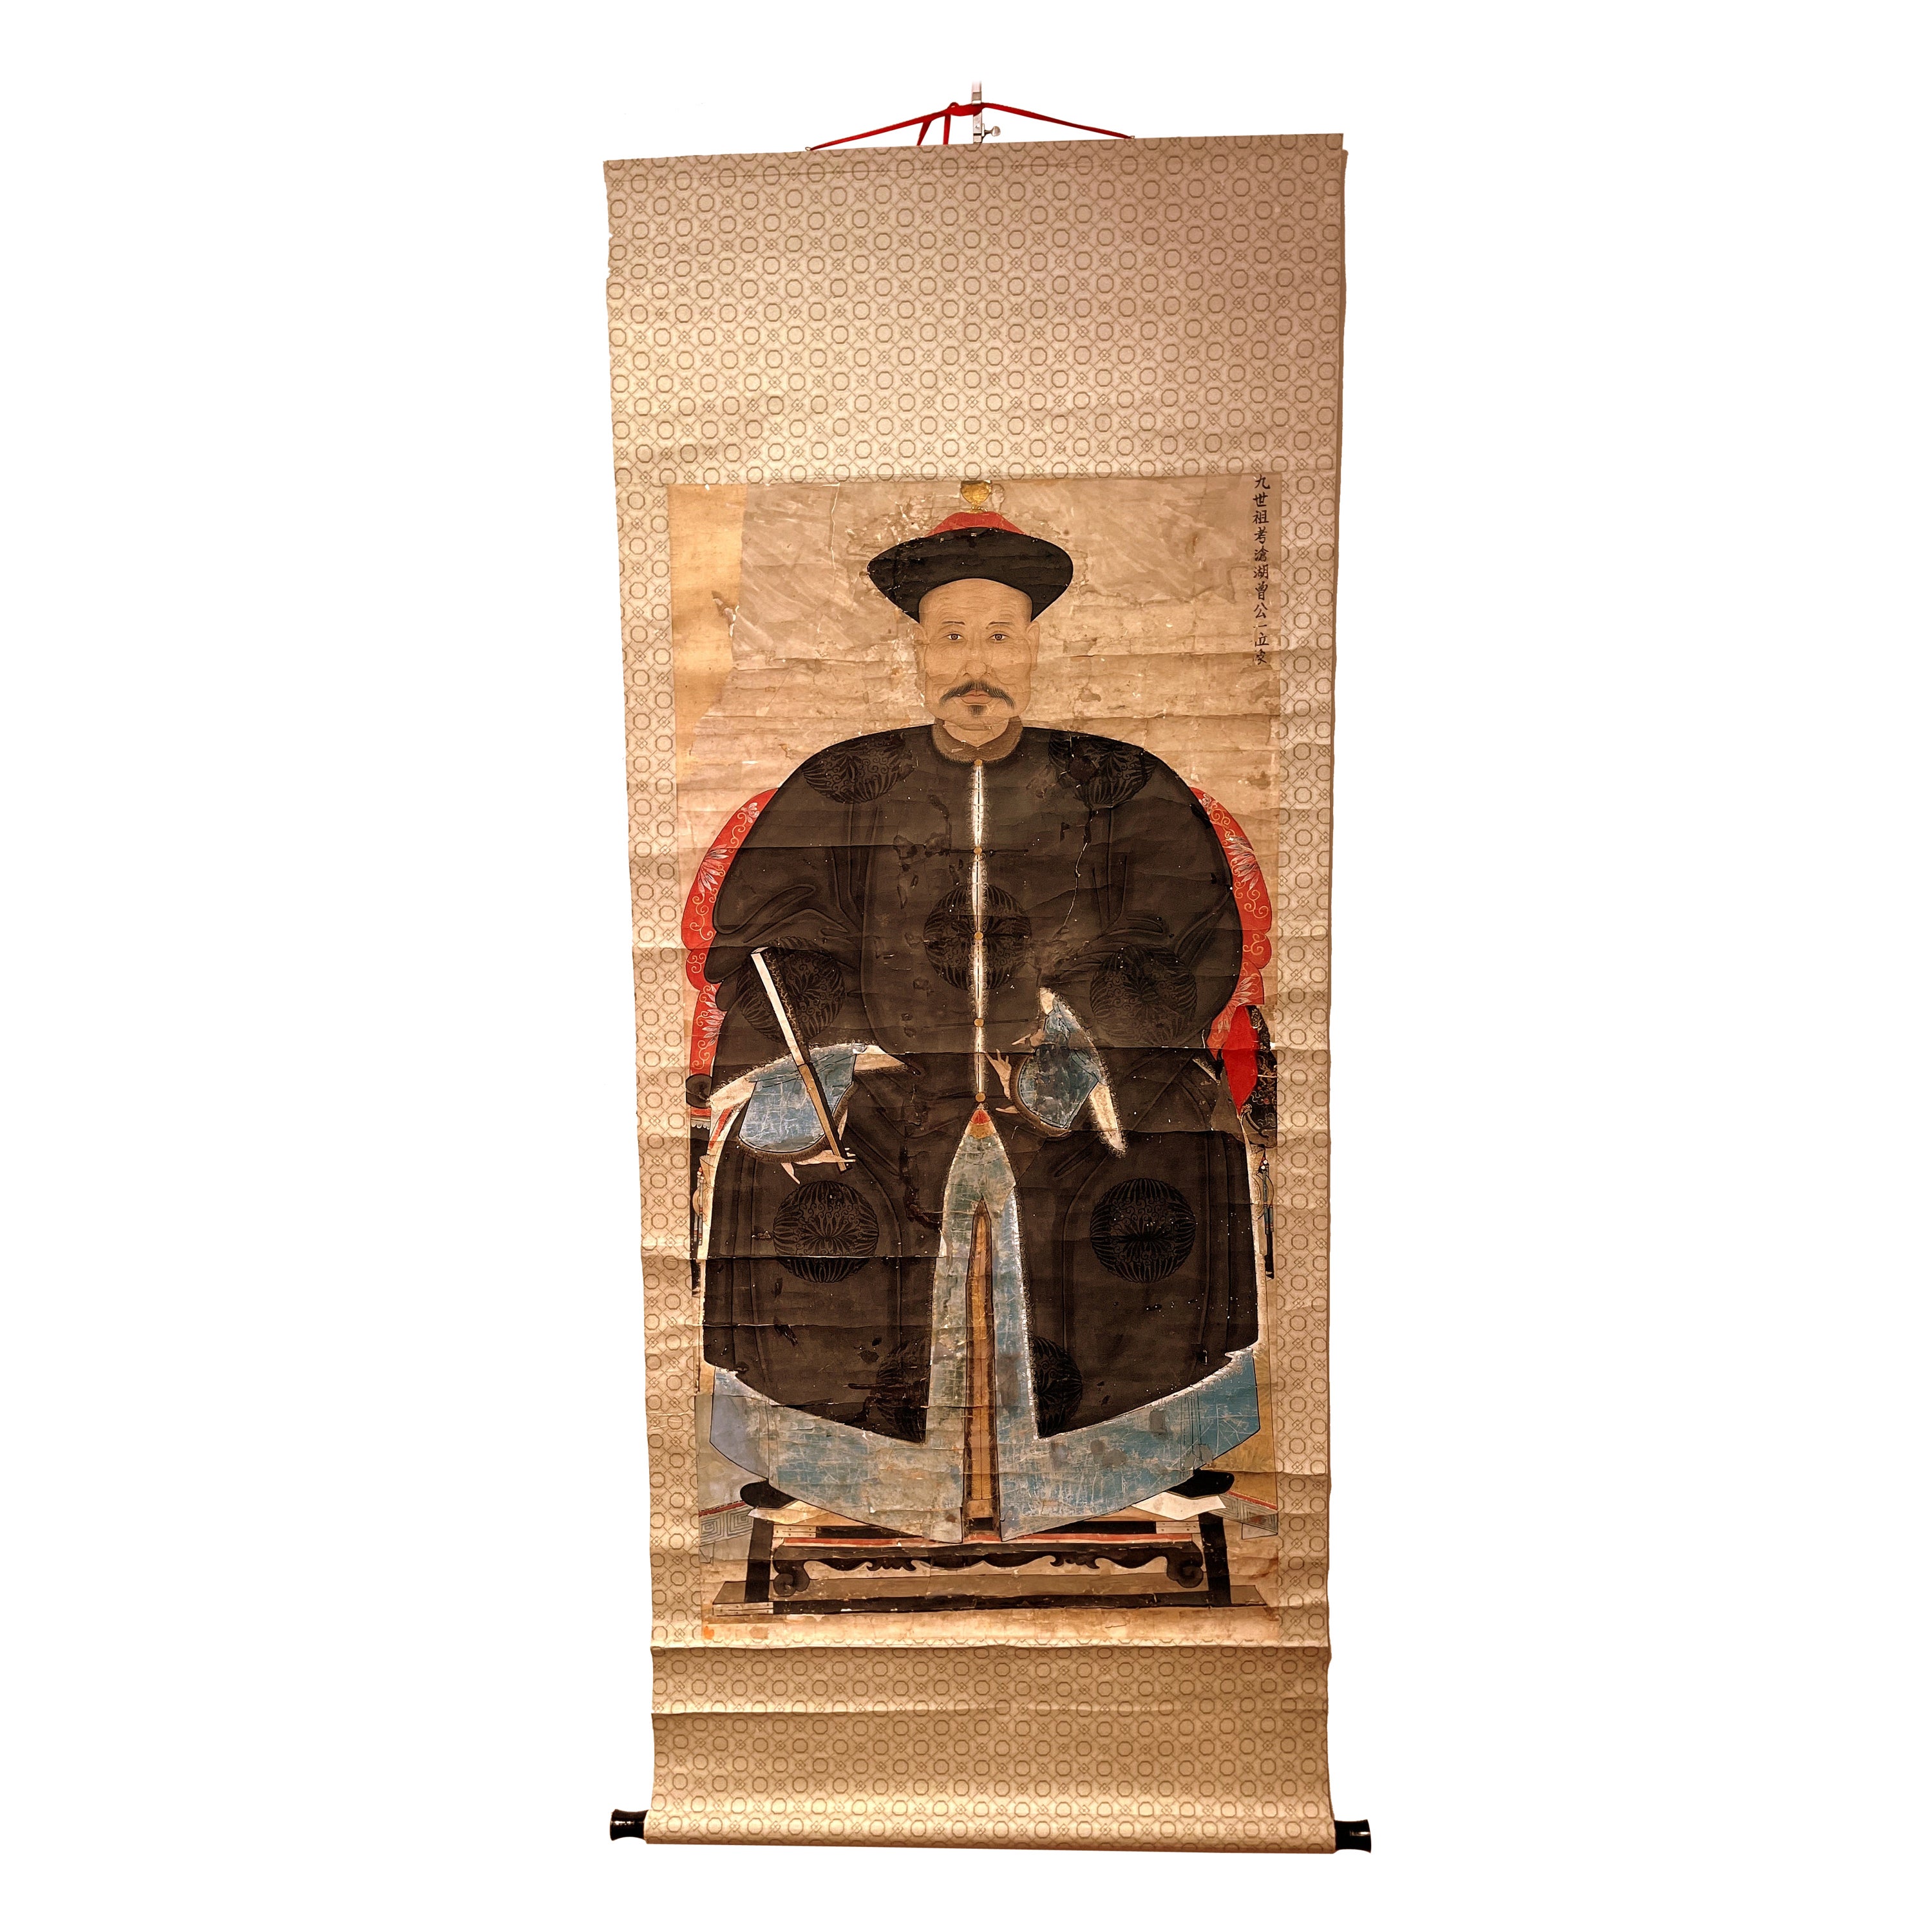 Large Chinese Ancestor Portrait Hanging Scroll Painting